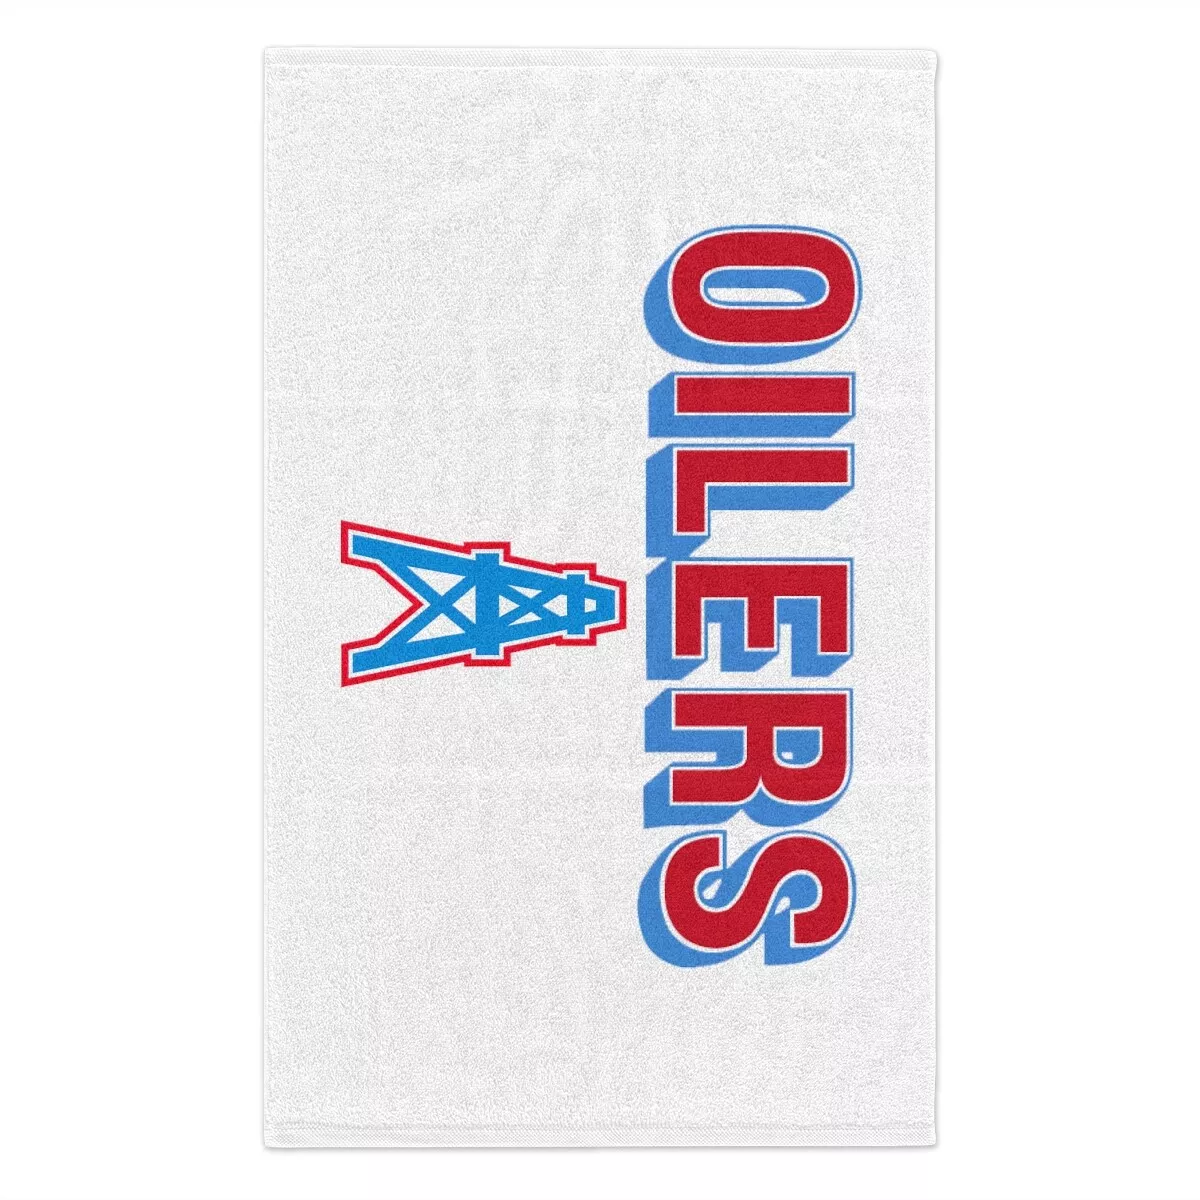 Rally Towel: Personalized Rally Towel with your photo and text.